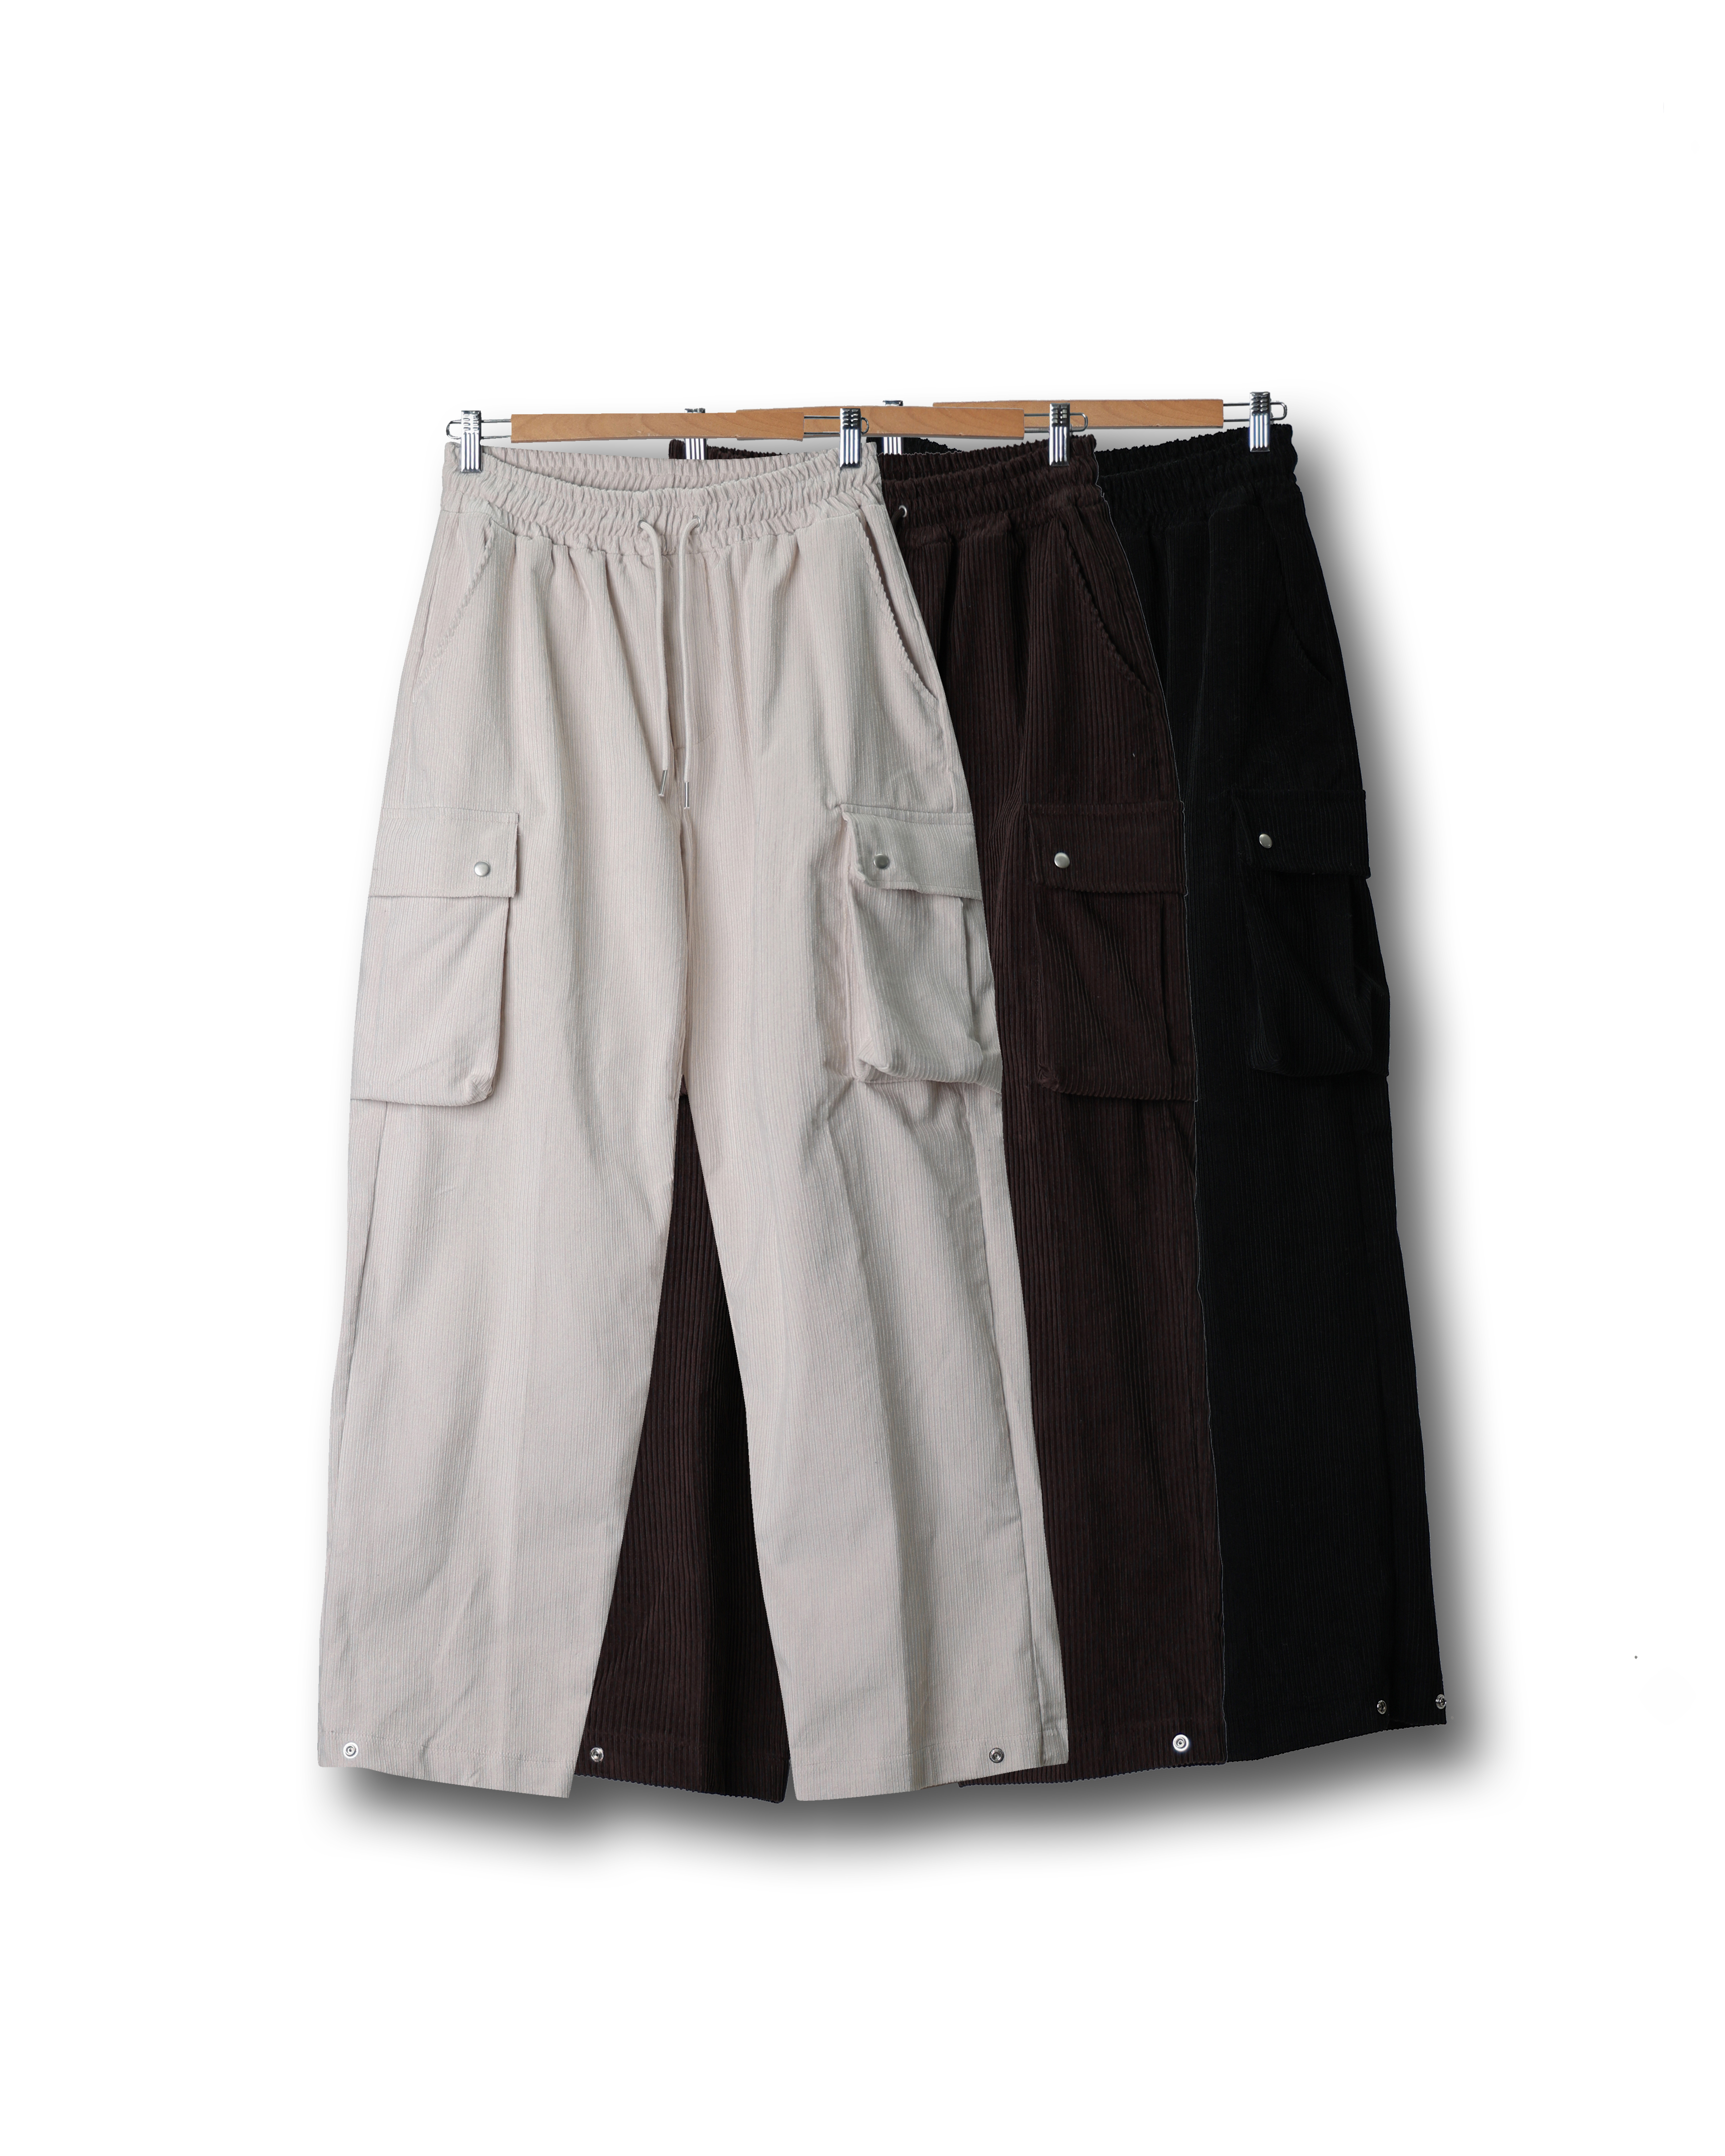 ONOF Corduroy Cargo Wide Button Pants (Black/Brown/Ivory)